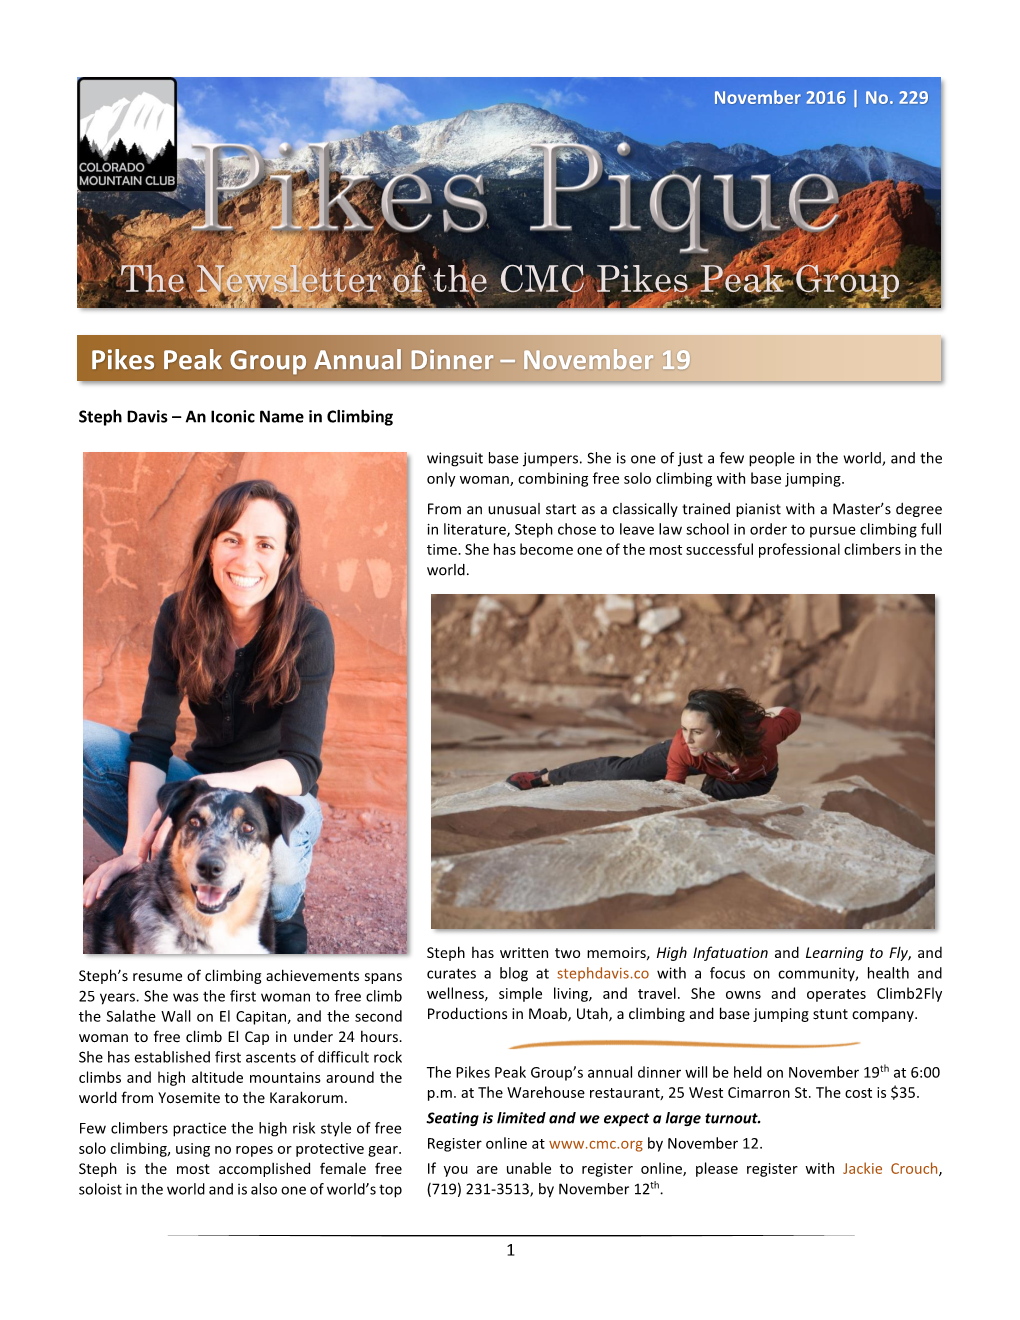 The Newsletter of the CMC Pikes Peak Group